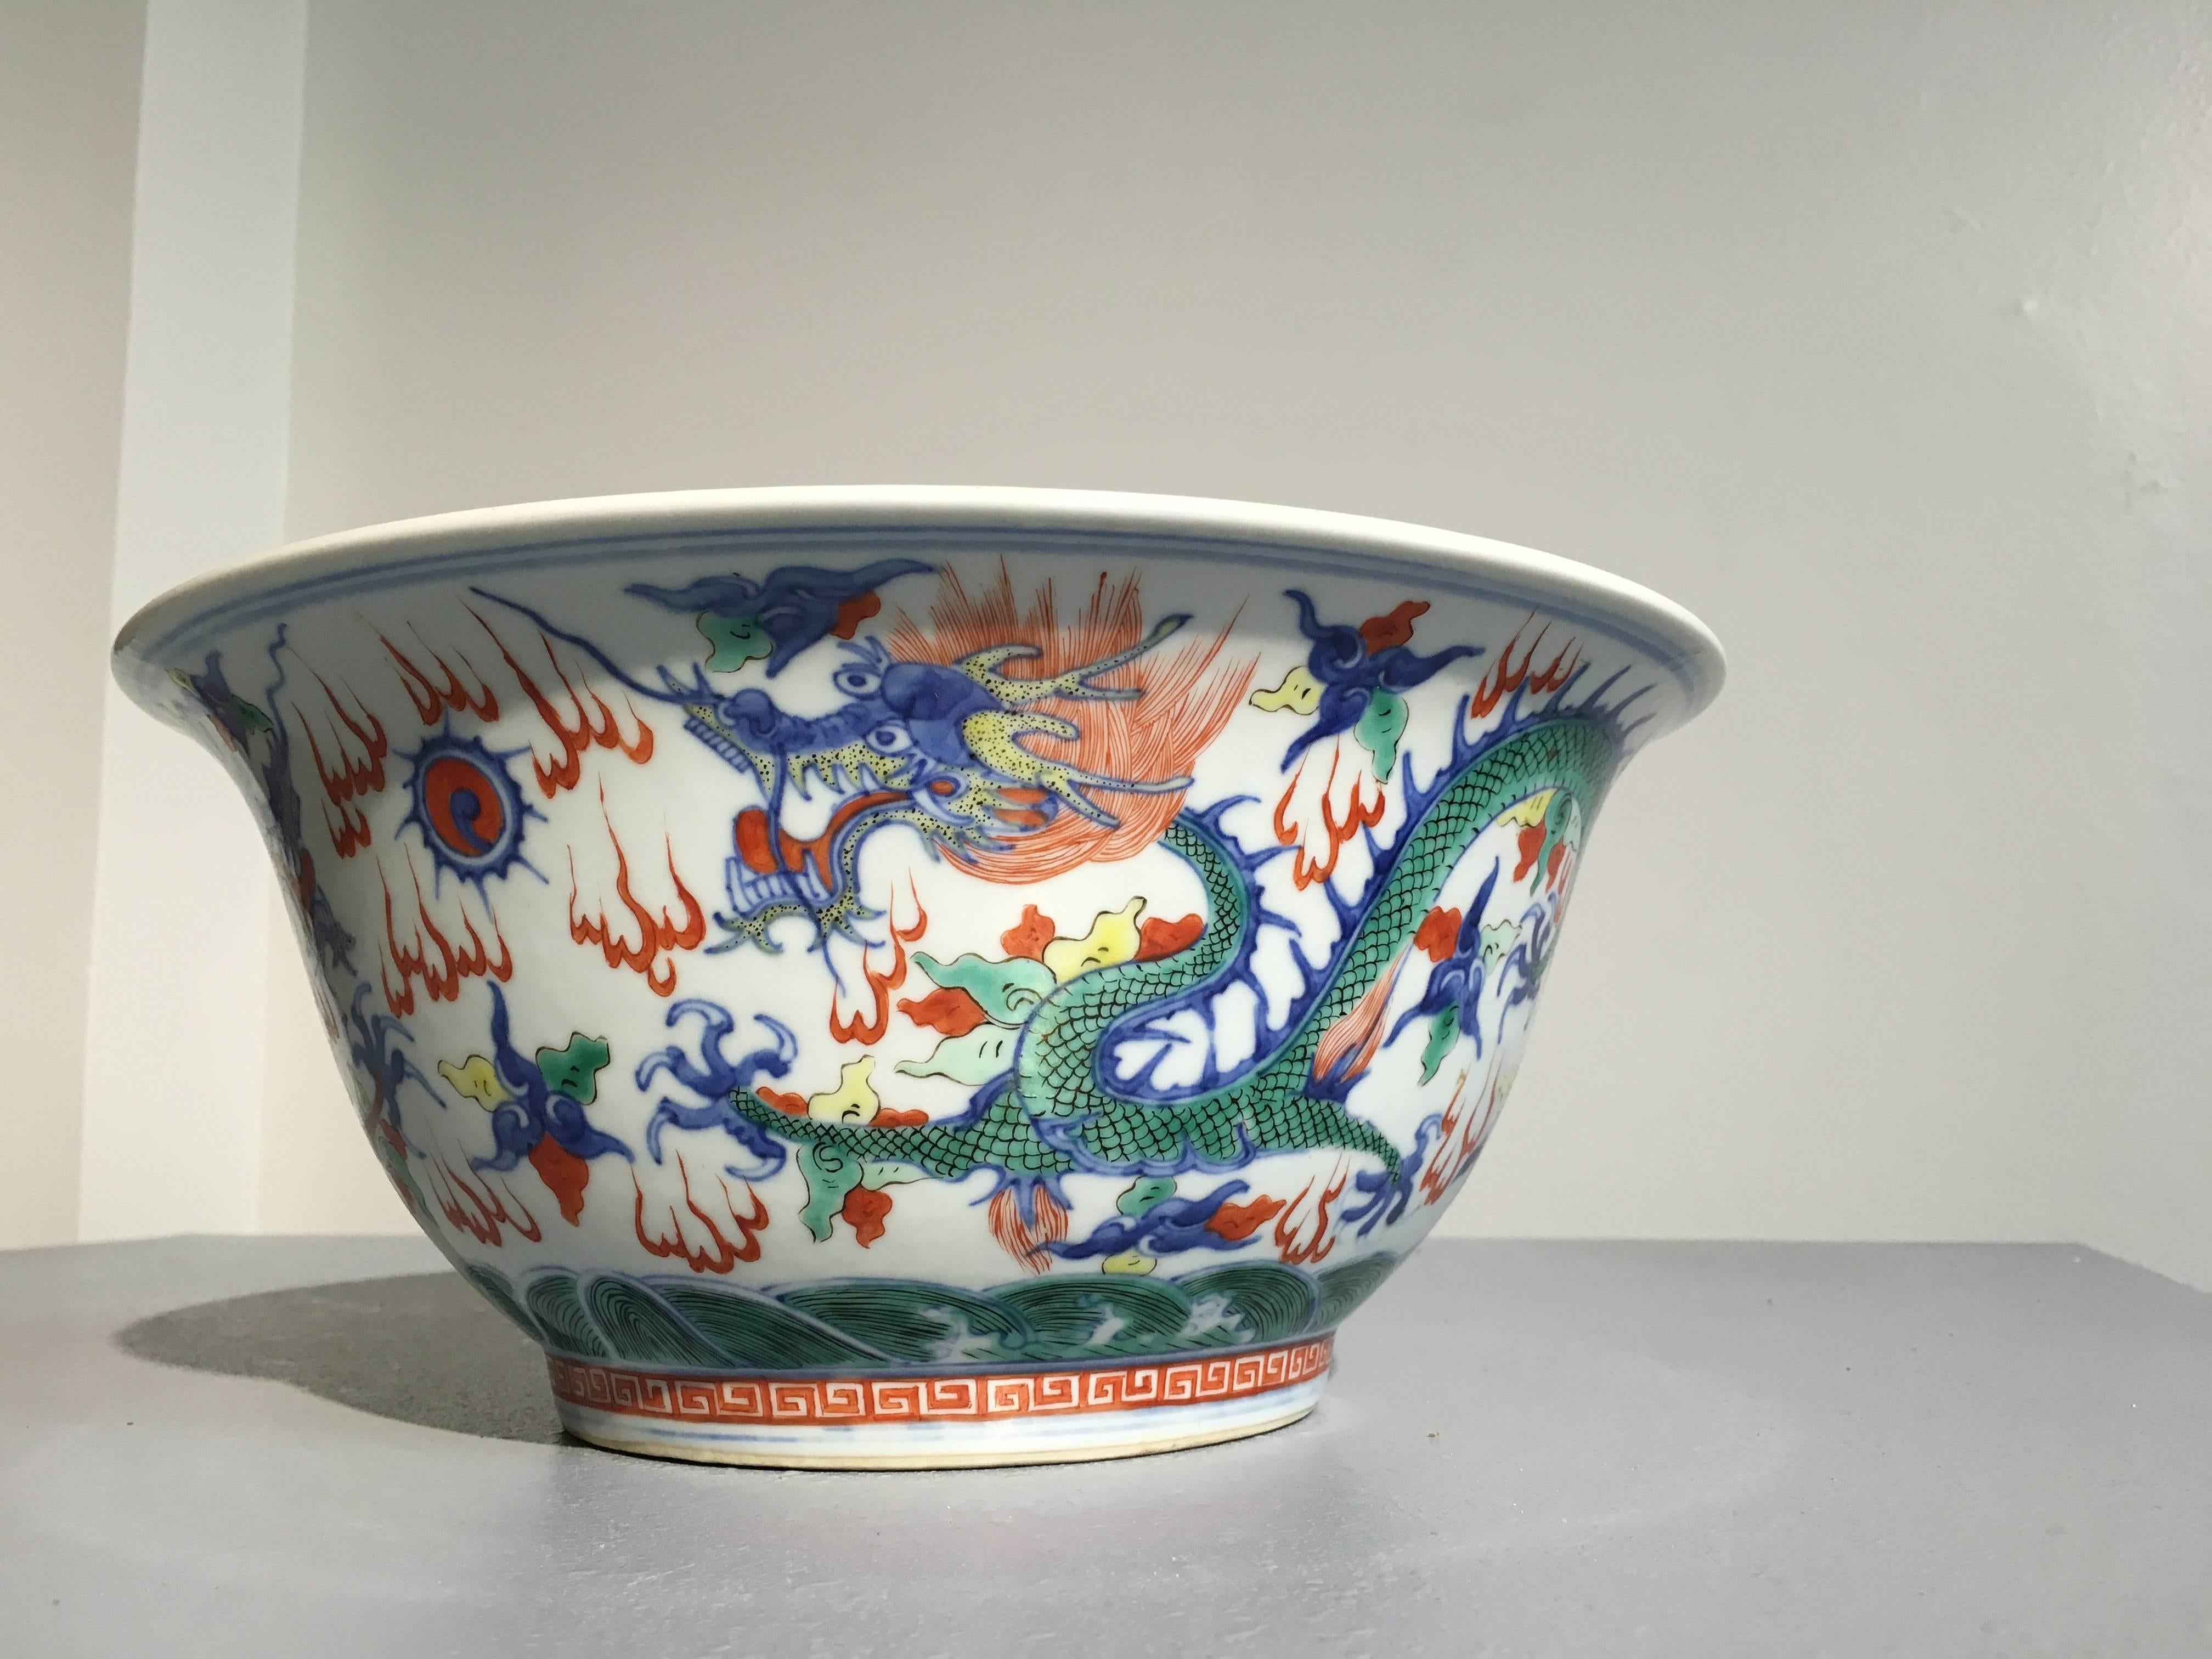 A large Chinese Qing dynasty porcelain wucai (five color) glazed bowl painted in underglaze blue and overglaze red, green, and yellow upon a pure white ground, and featuring a design of dragons to both the exterior and interior. An apocryphal 